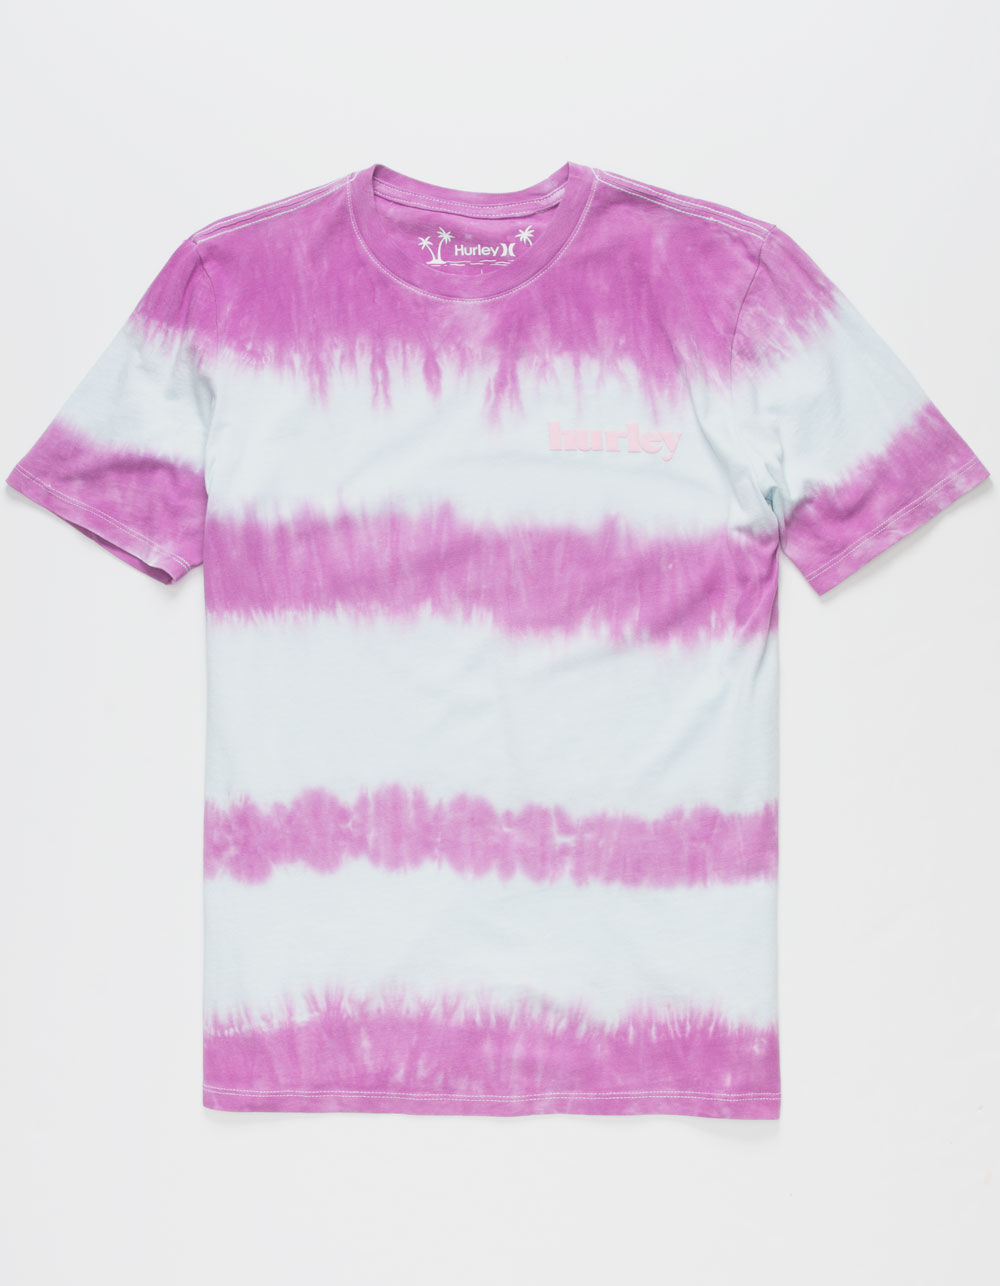 HURLEY Washed Tie Dye Mens Tee - BLUE COMBO | Tillys